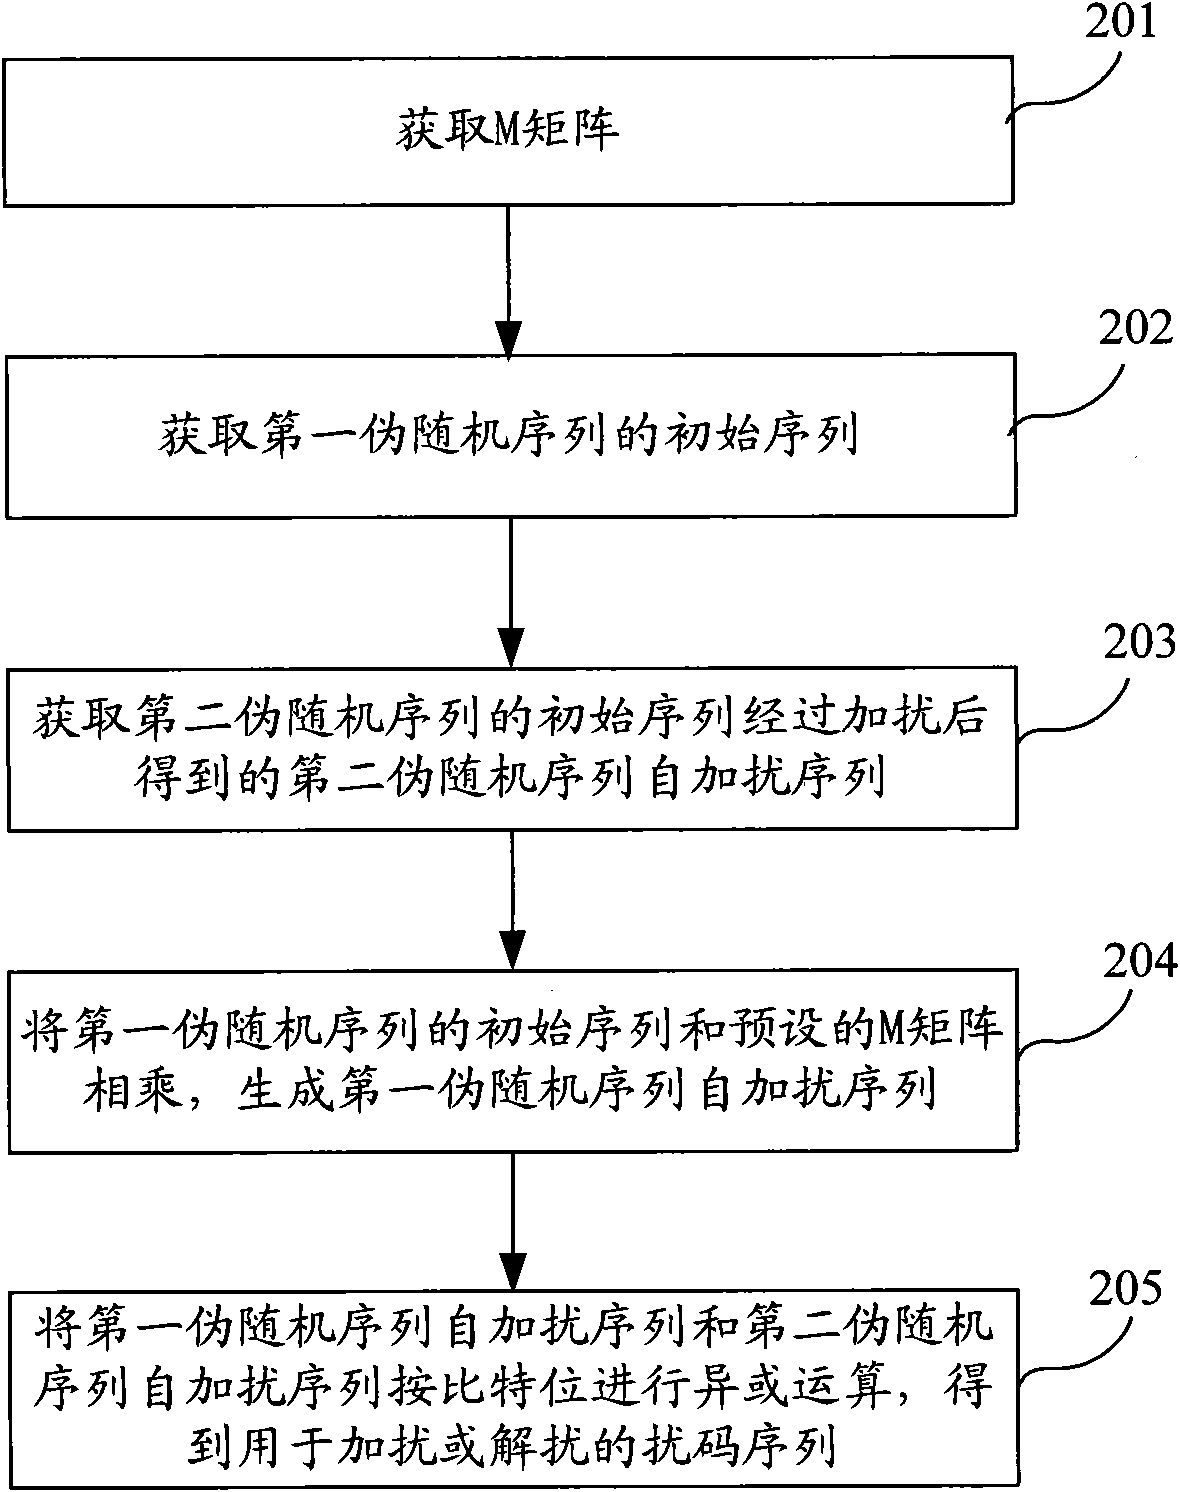 Scrambling code sequence generation method, device and system for scrambling or descrambling